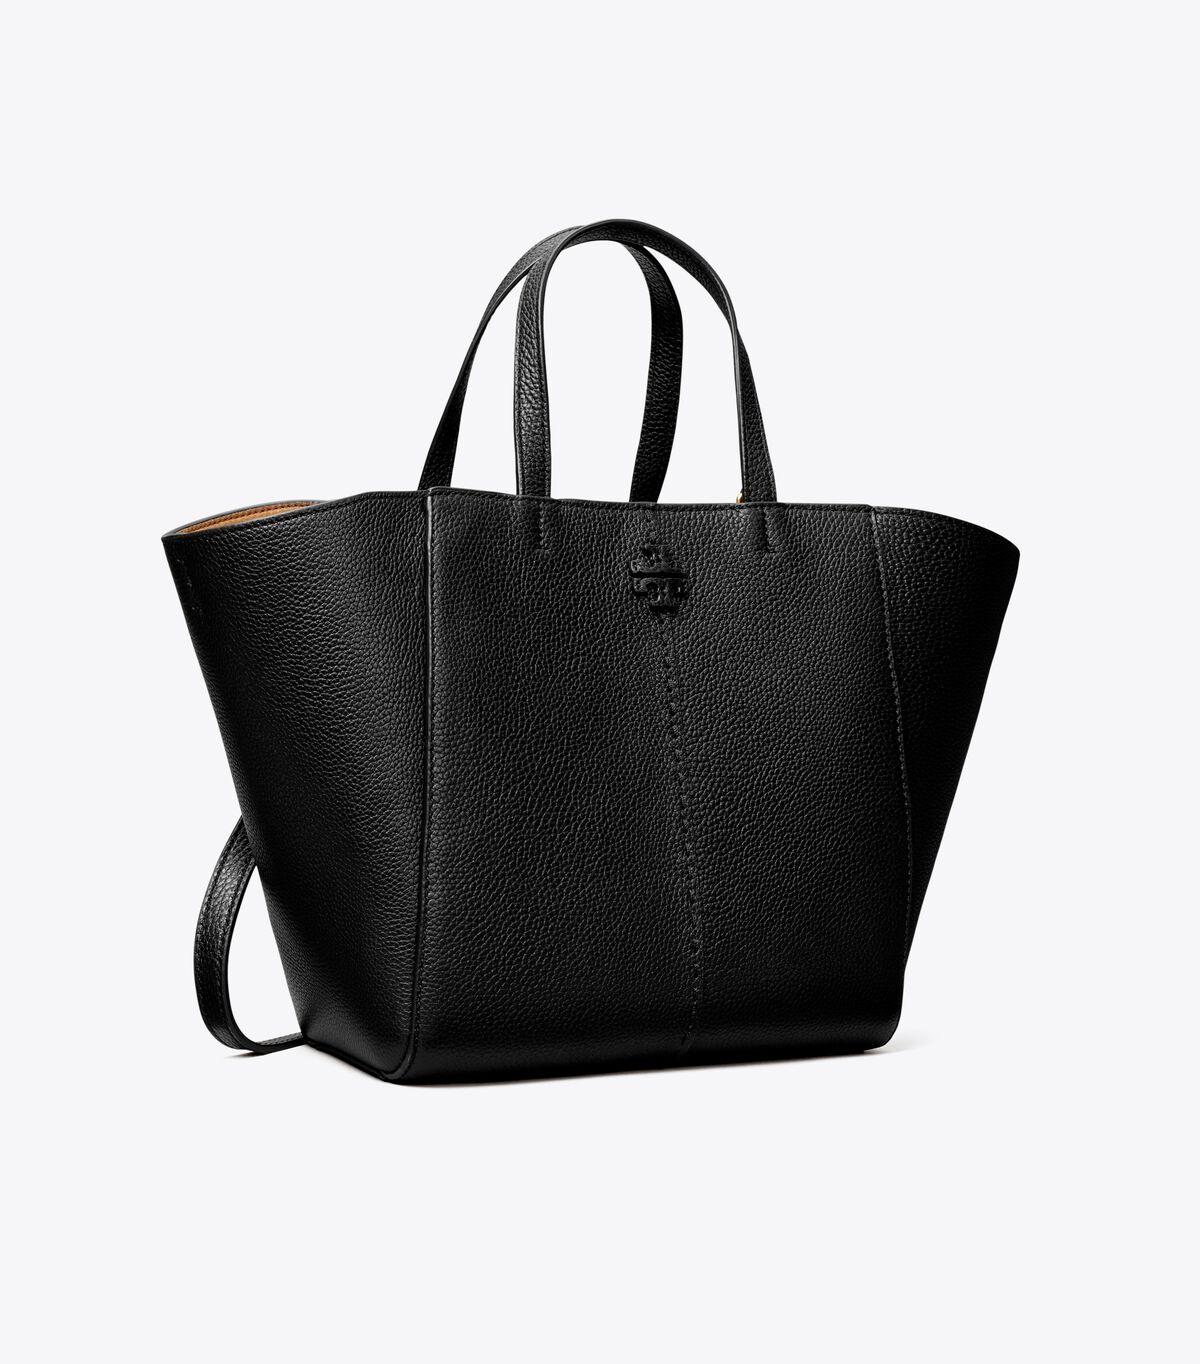 Black Tory Burch Mcgraw Carryall Women's Tote Bags | OUTLET-13540969